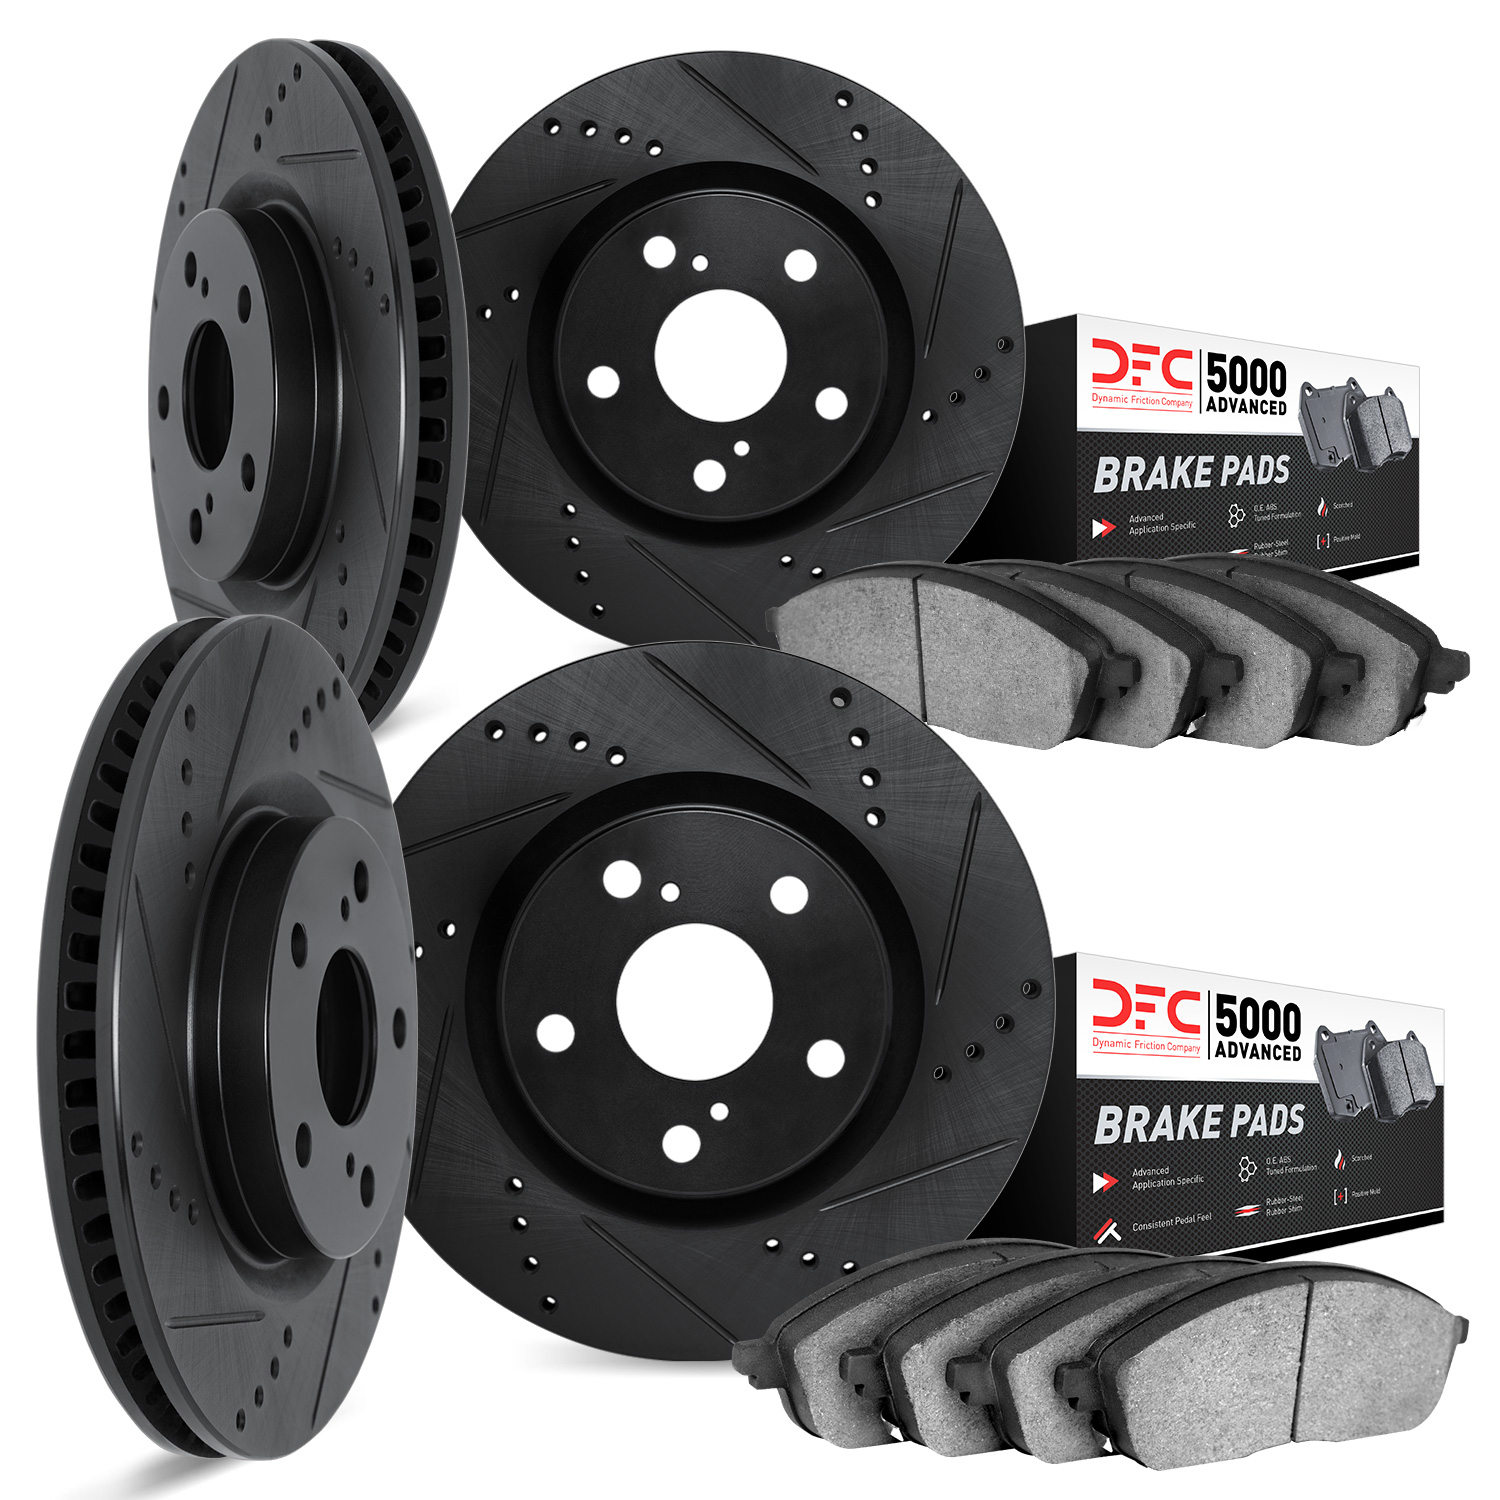 8504-31046 Drilled/Slotted Brake Rotors w/5000 Advanced Brake Pads Kit [Black], 2011-2016 BMW, Position: Front and Rear